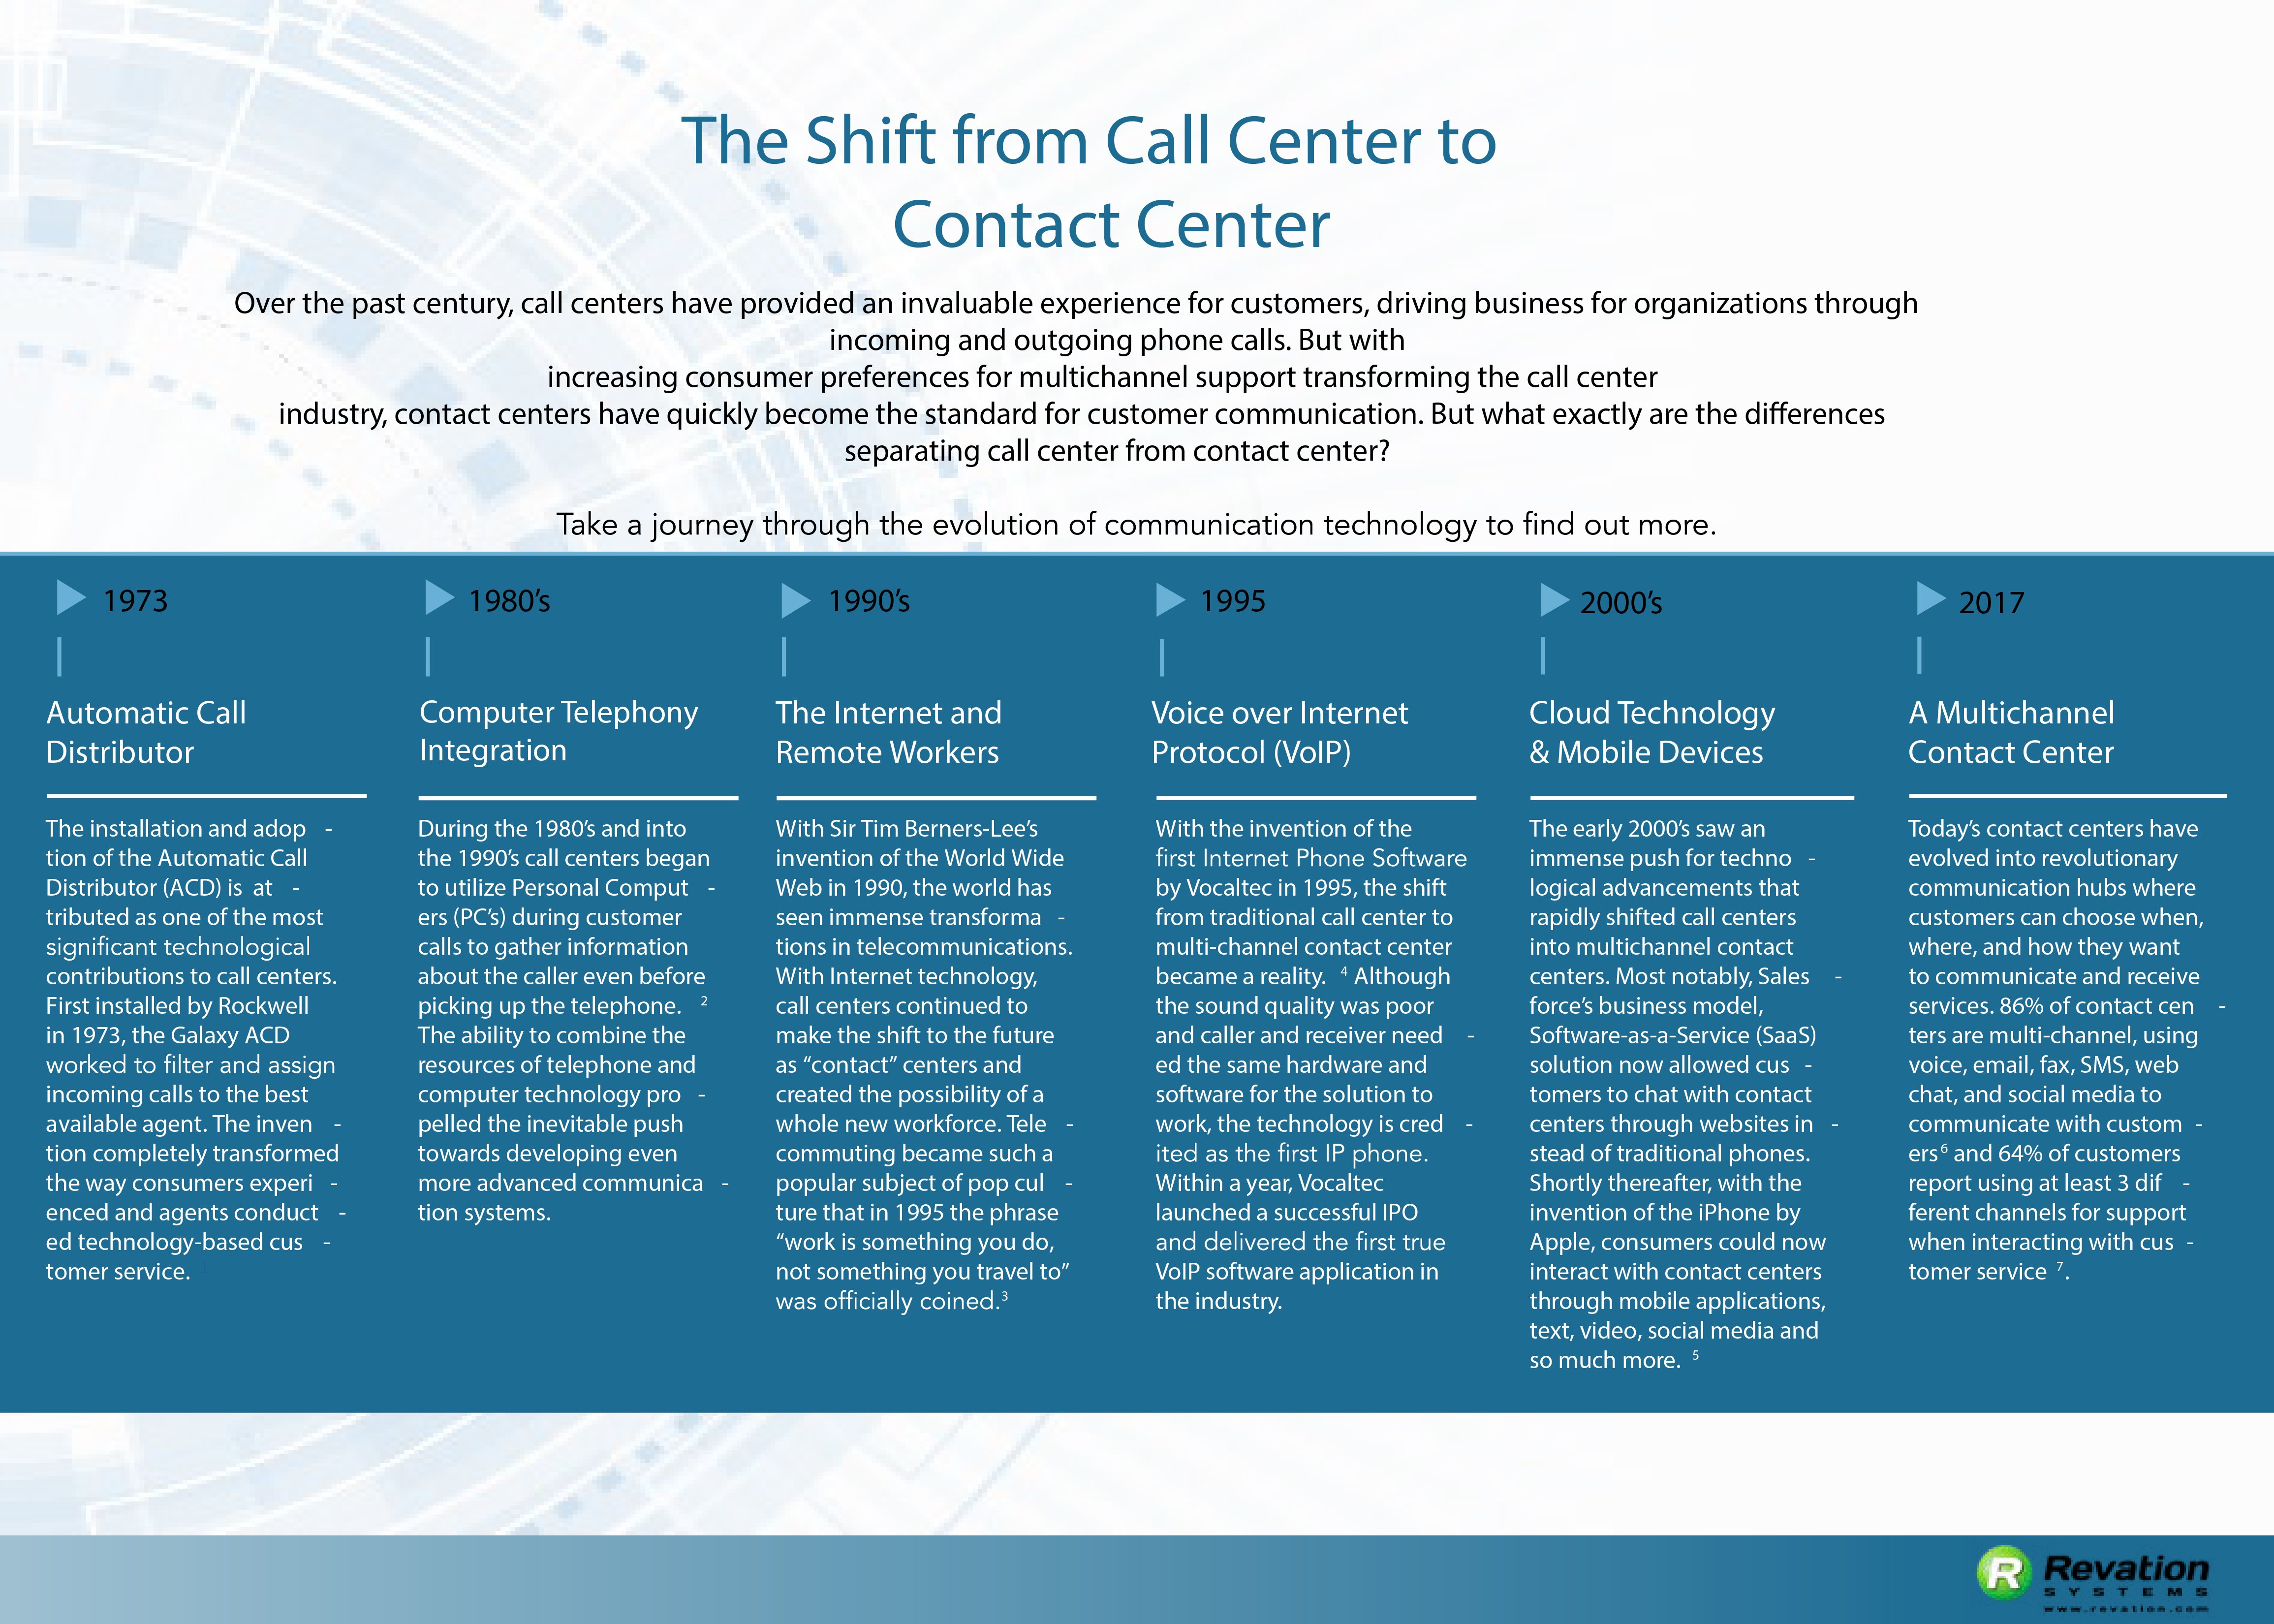 The Shift from Call Center to Contact Center